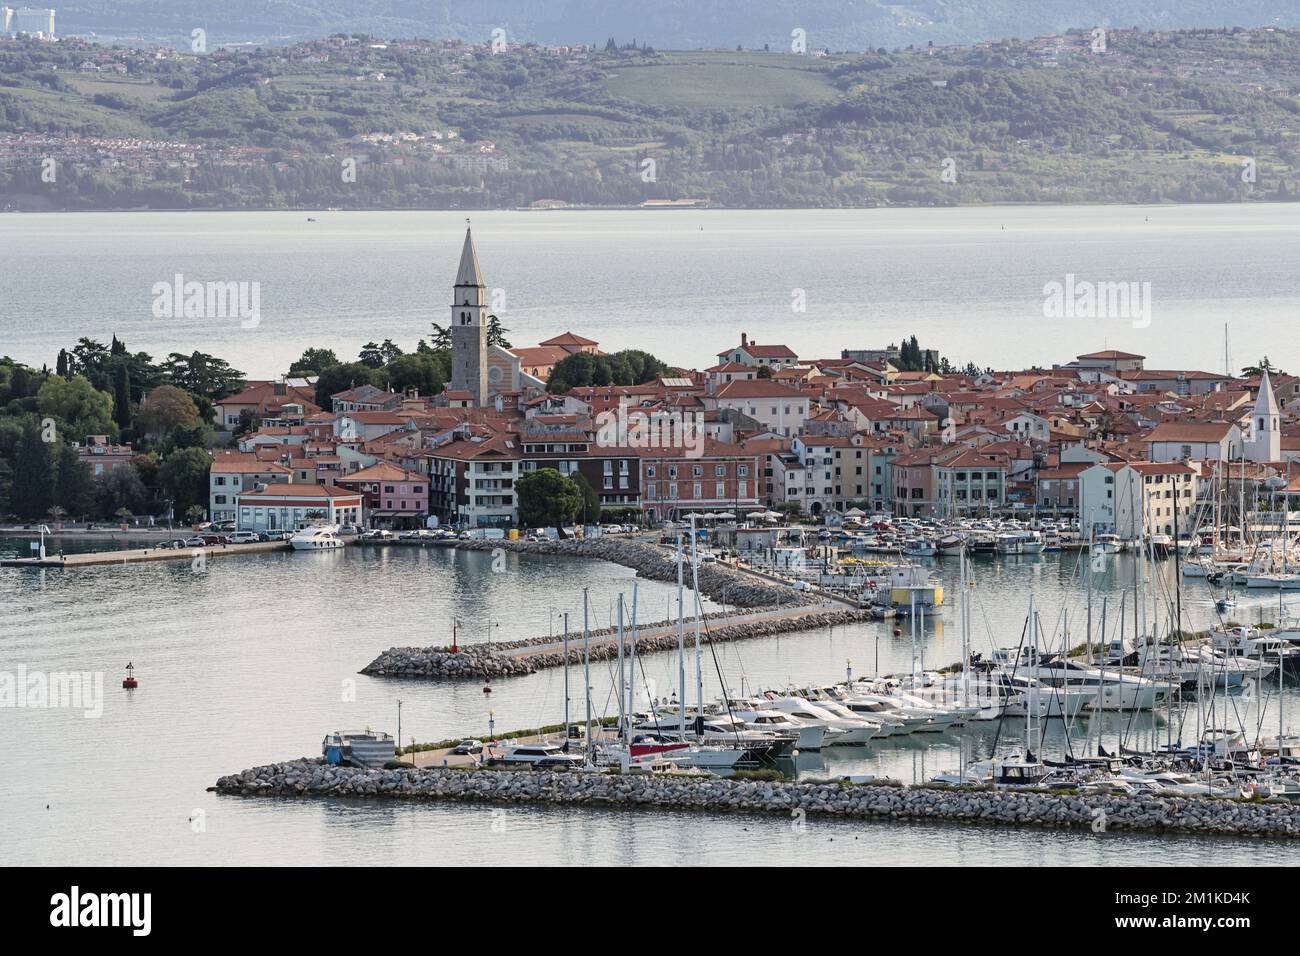 Editorial: IZOLA, SLOVENIA, SEPTEMBER 12, 2022 - Overview of Izola and its marina, seen from the overlook above the small town Stock Photo